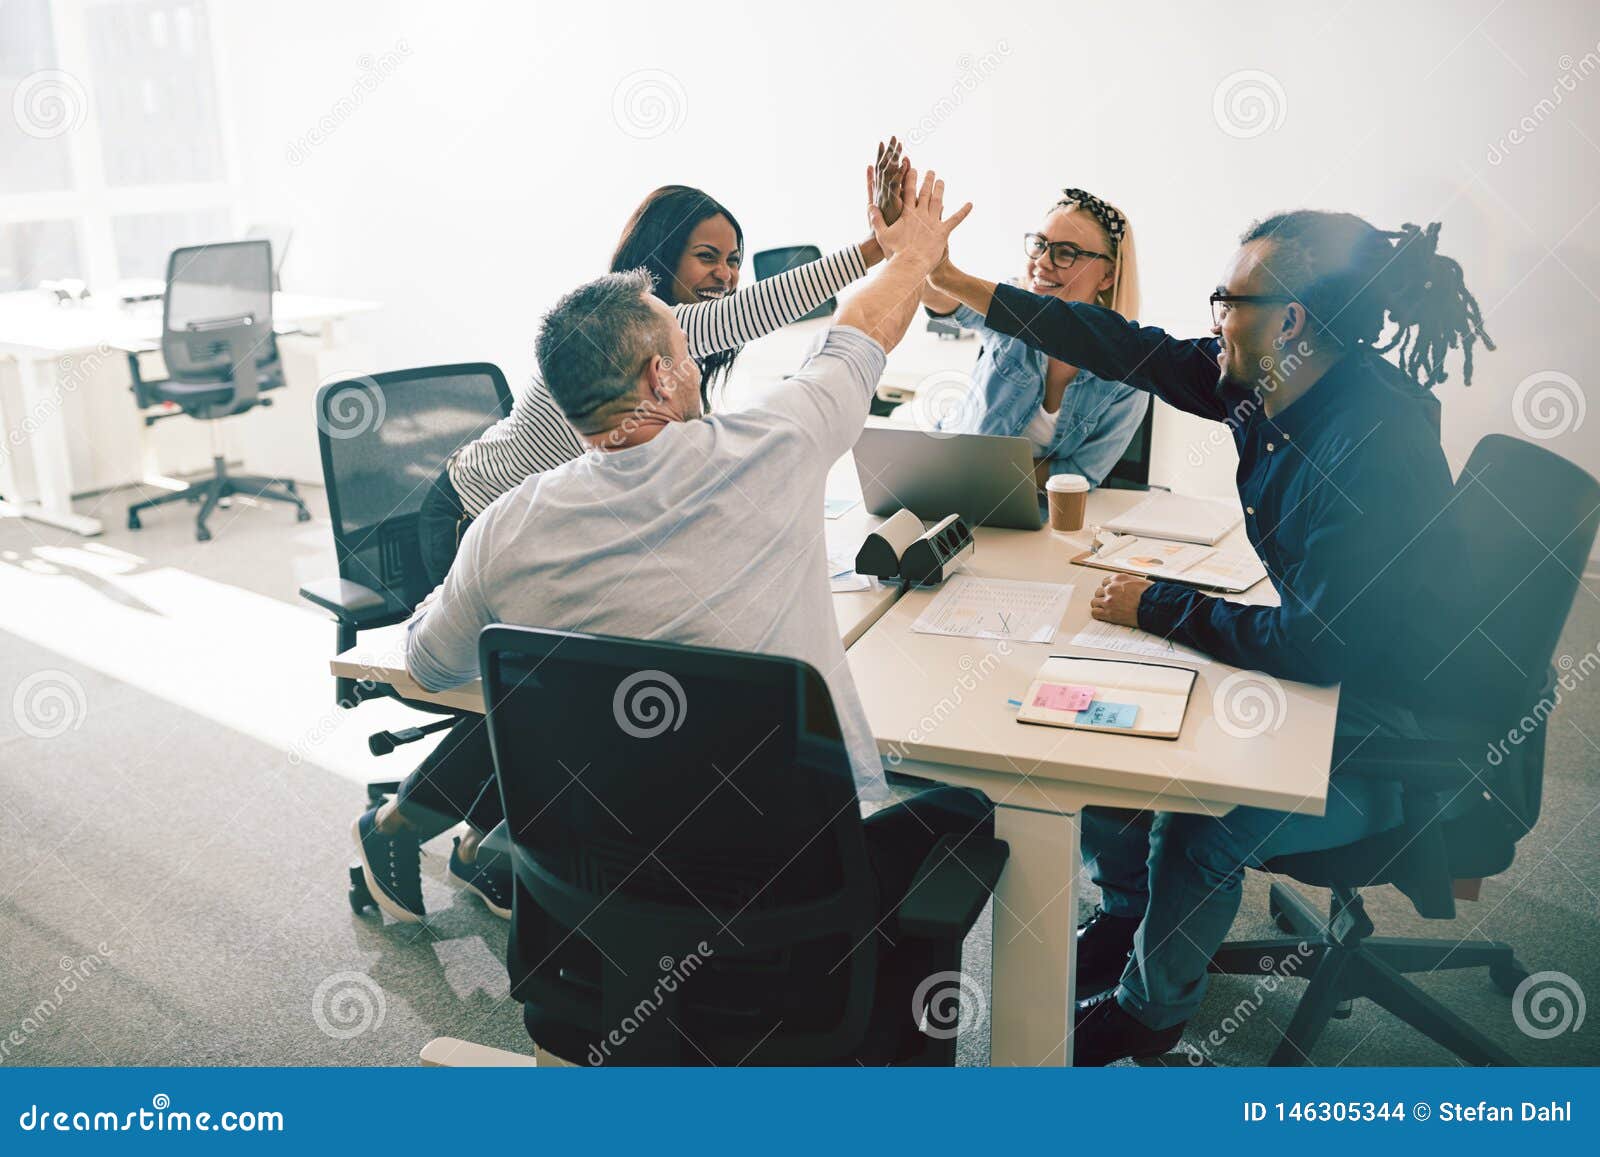 group of laughing coworkers high fiving during an office meeting